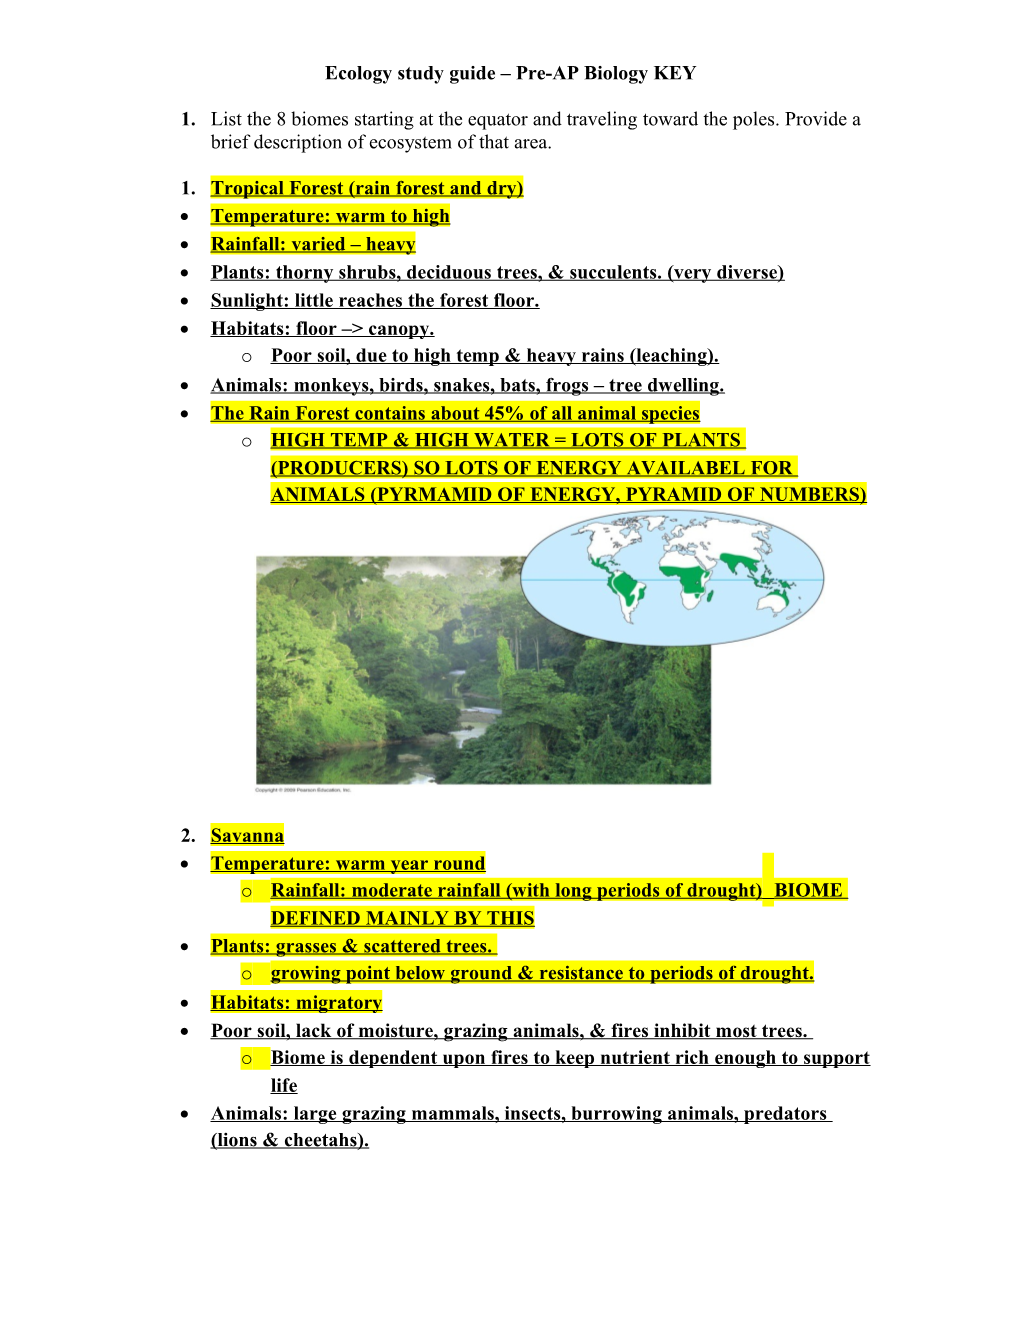 Ecology Study Guide - H